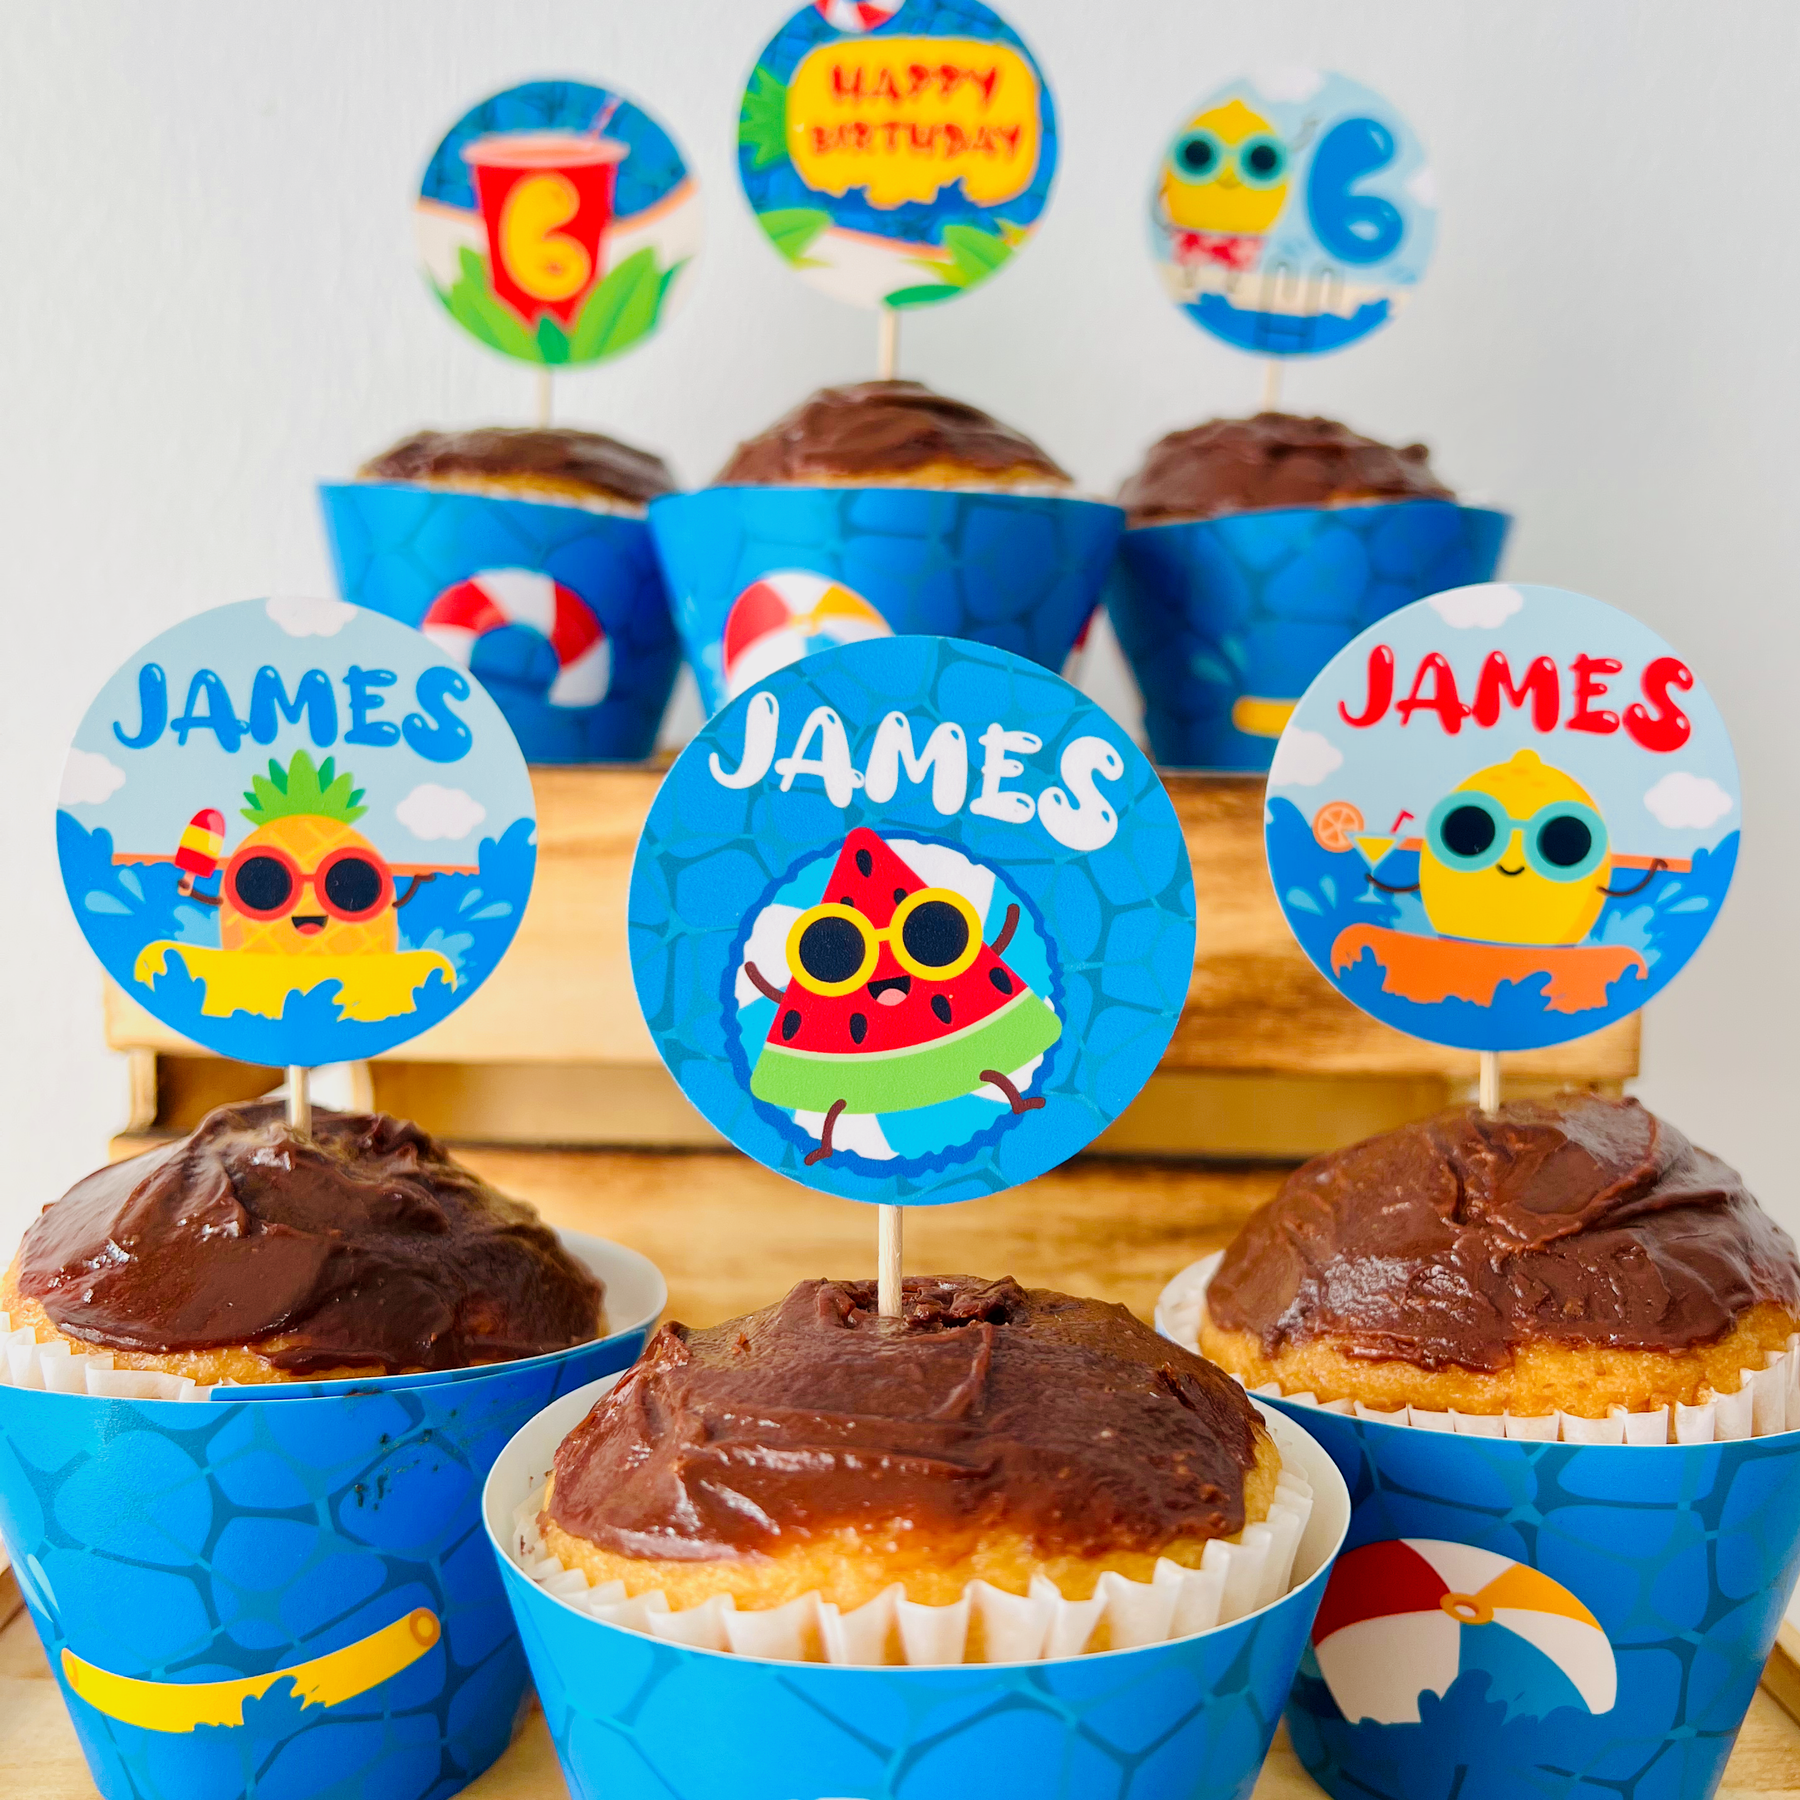 DIY Editable Gaming Party Cupcake Toppers